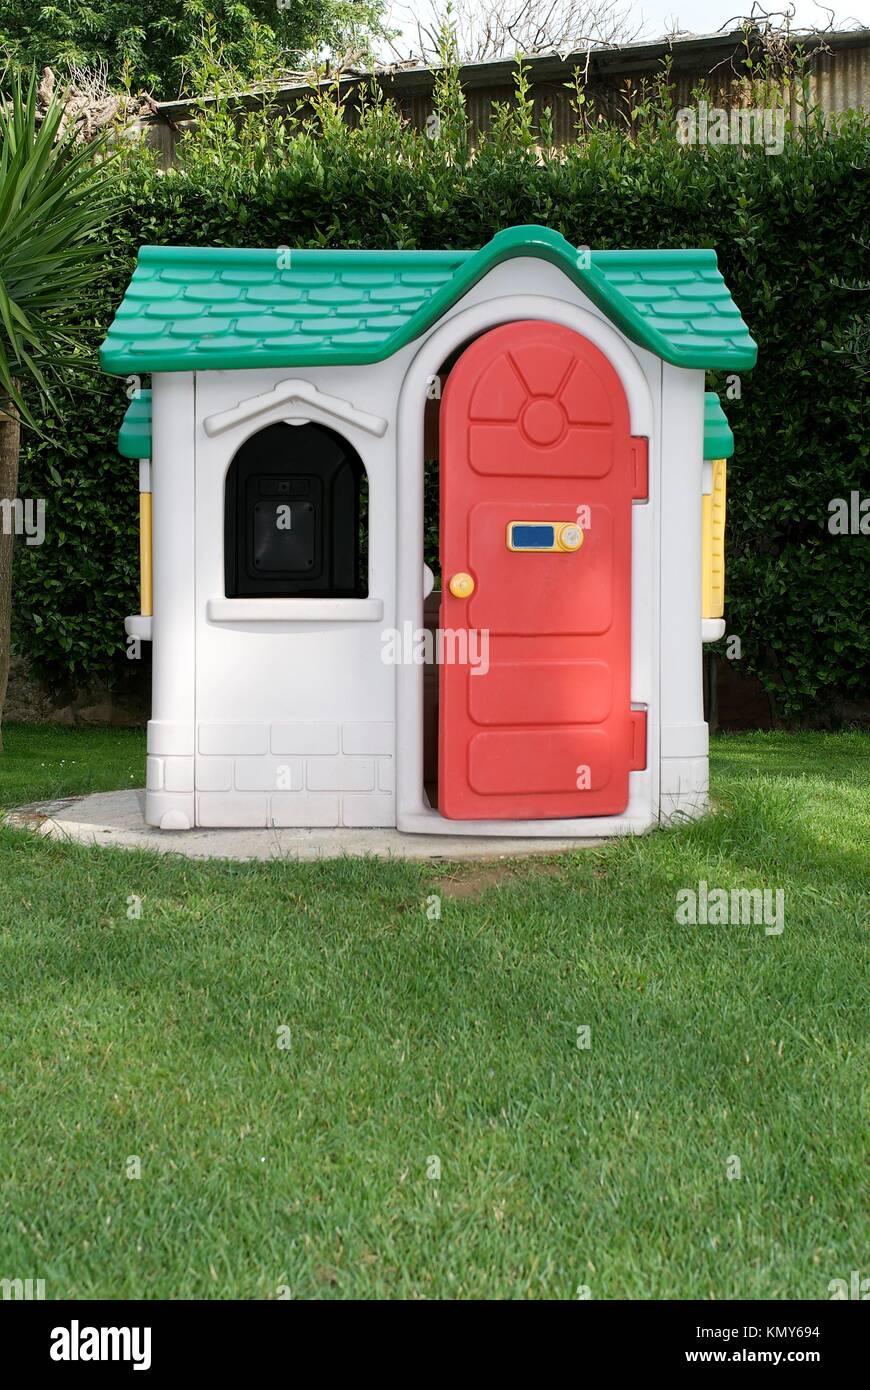 Toy house in the garden Stock Photo - Alamy